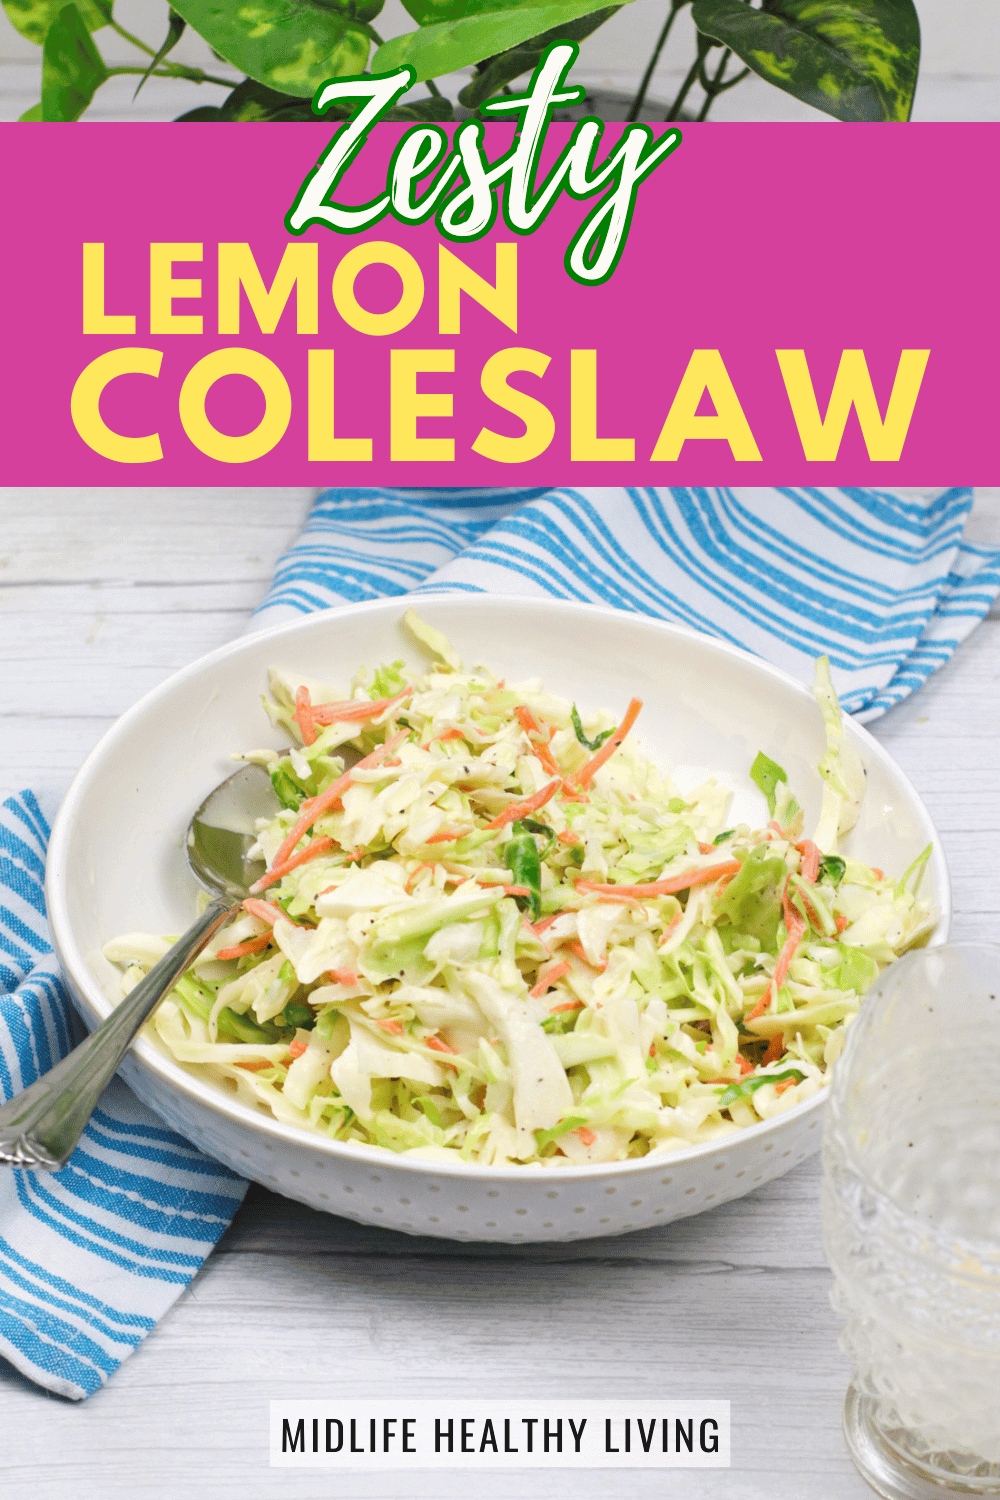 lemon coleslaw recipe perfect for summer parties and bbq